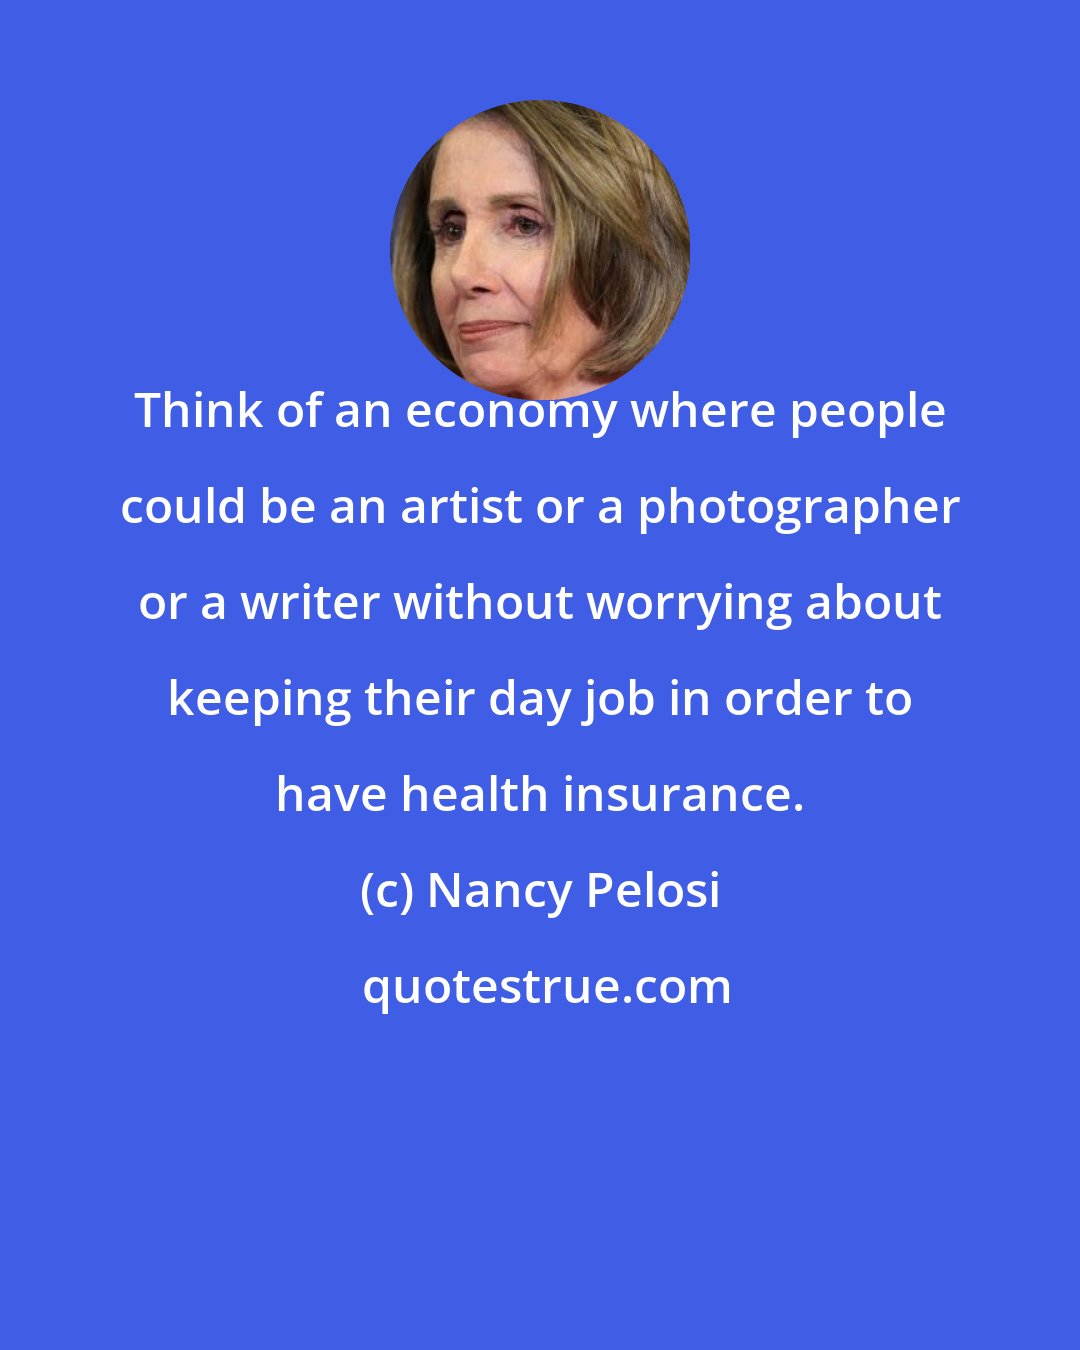 Nancy Pelosi: Think of an economy where people could be an artist or a photographer or a writer without worrying about keeping their day job in order to have health insurance.